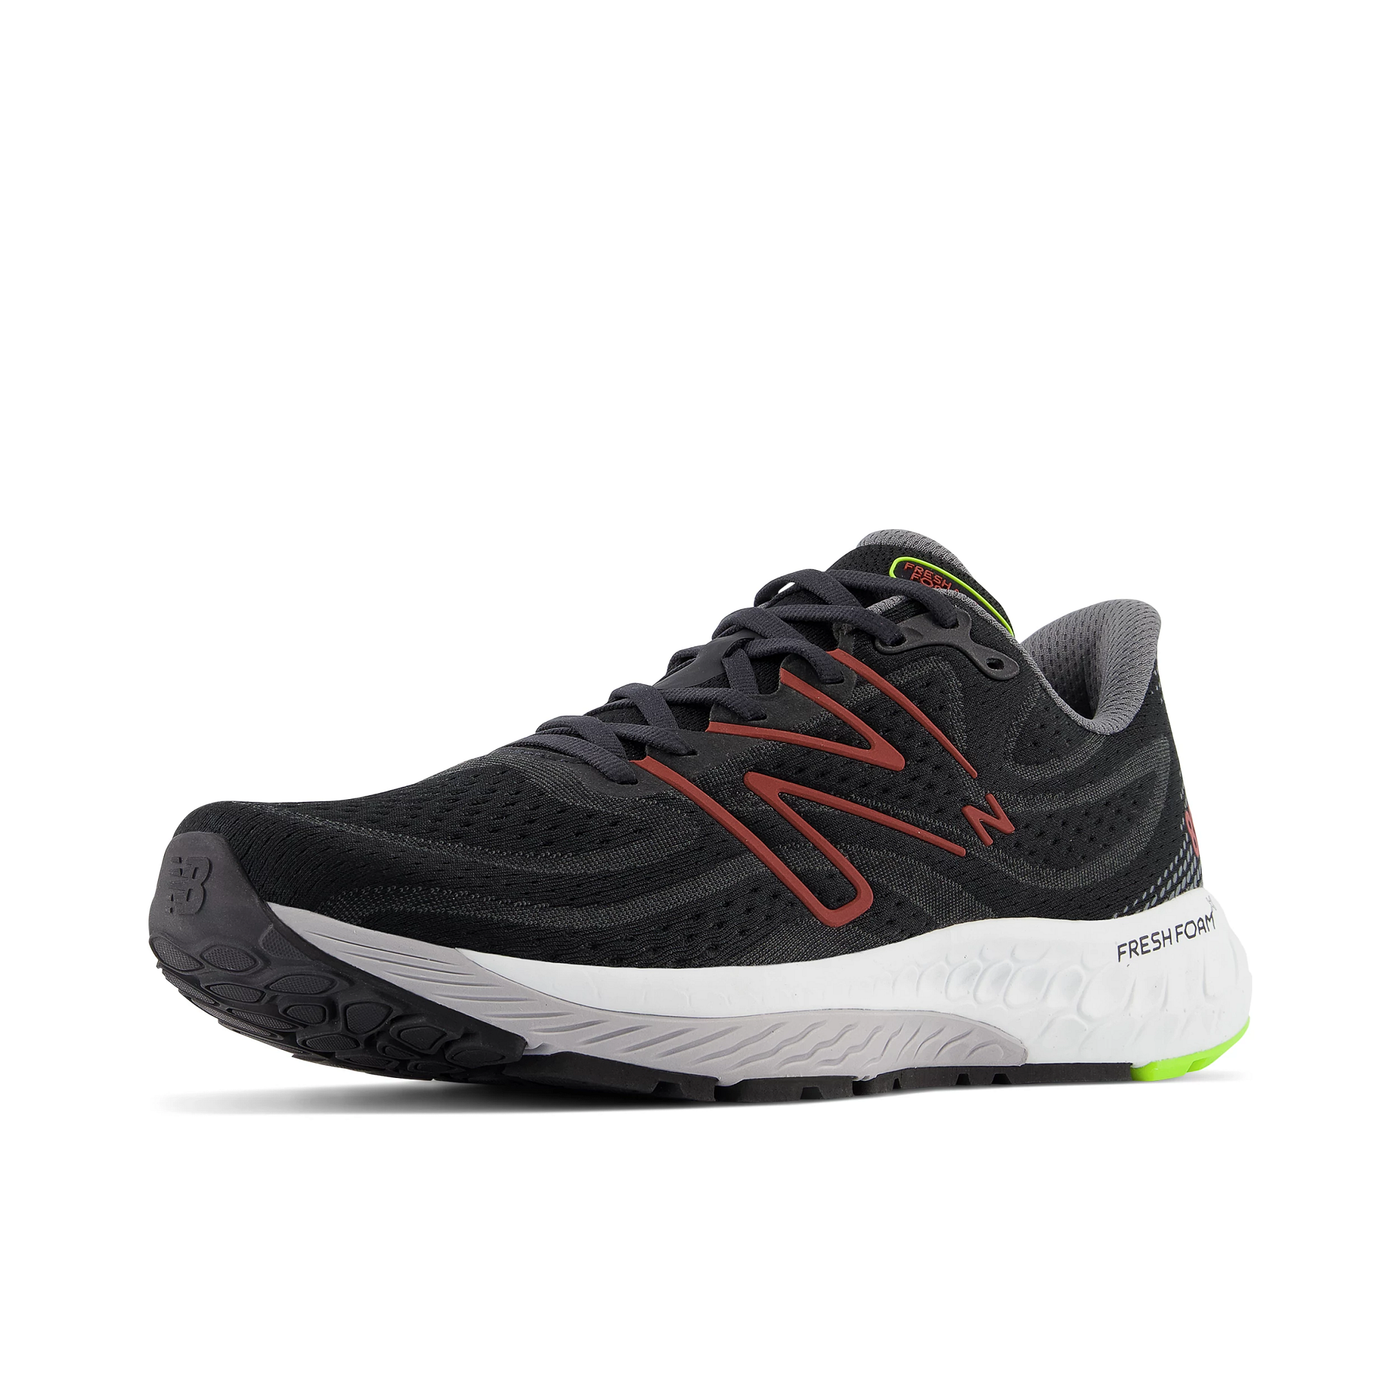 New Balance Mens 880V13 Wide - 2E Width - Black/Red Synthetic - Neutral